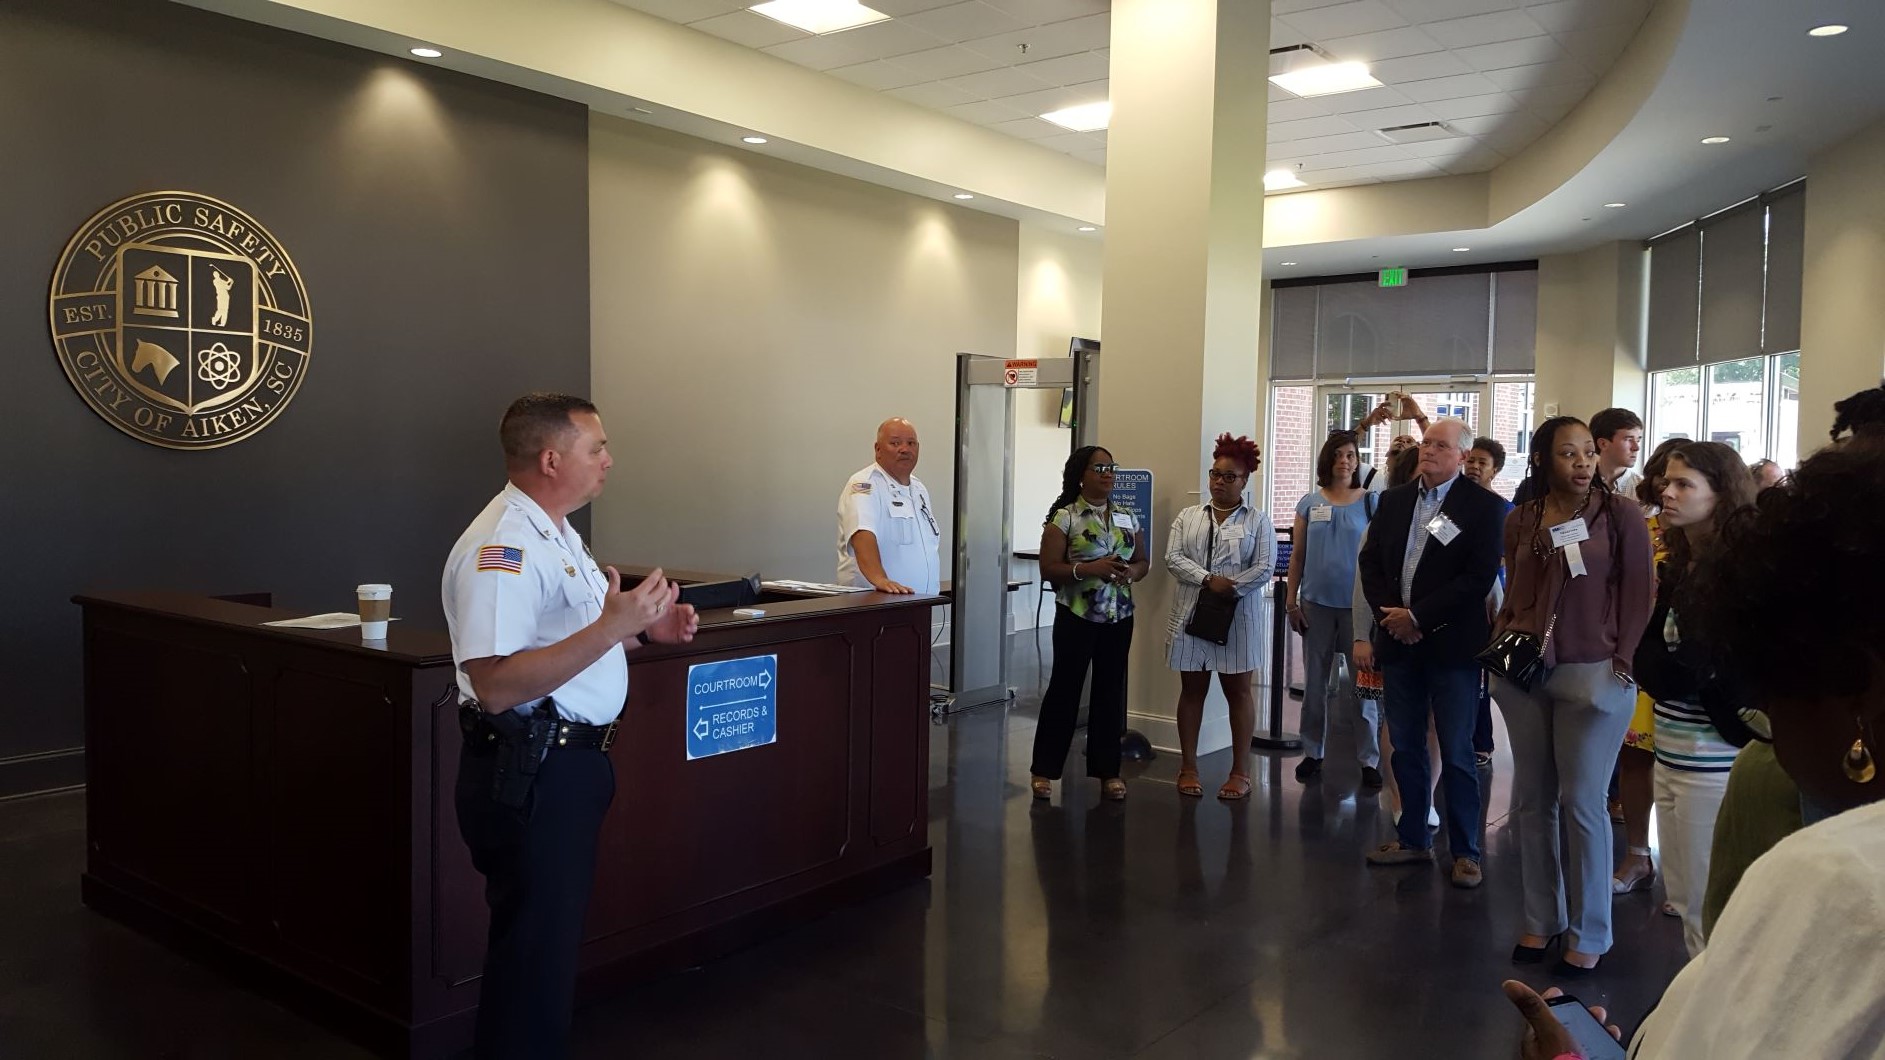 Charles Barranco, chief of the Aiken Department of Public Safety, showcased the department's new headquarters